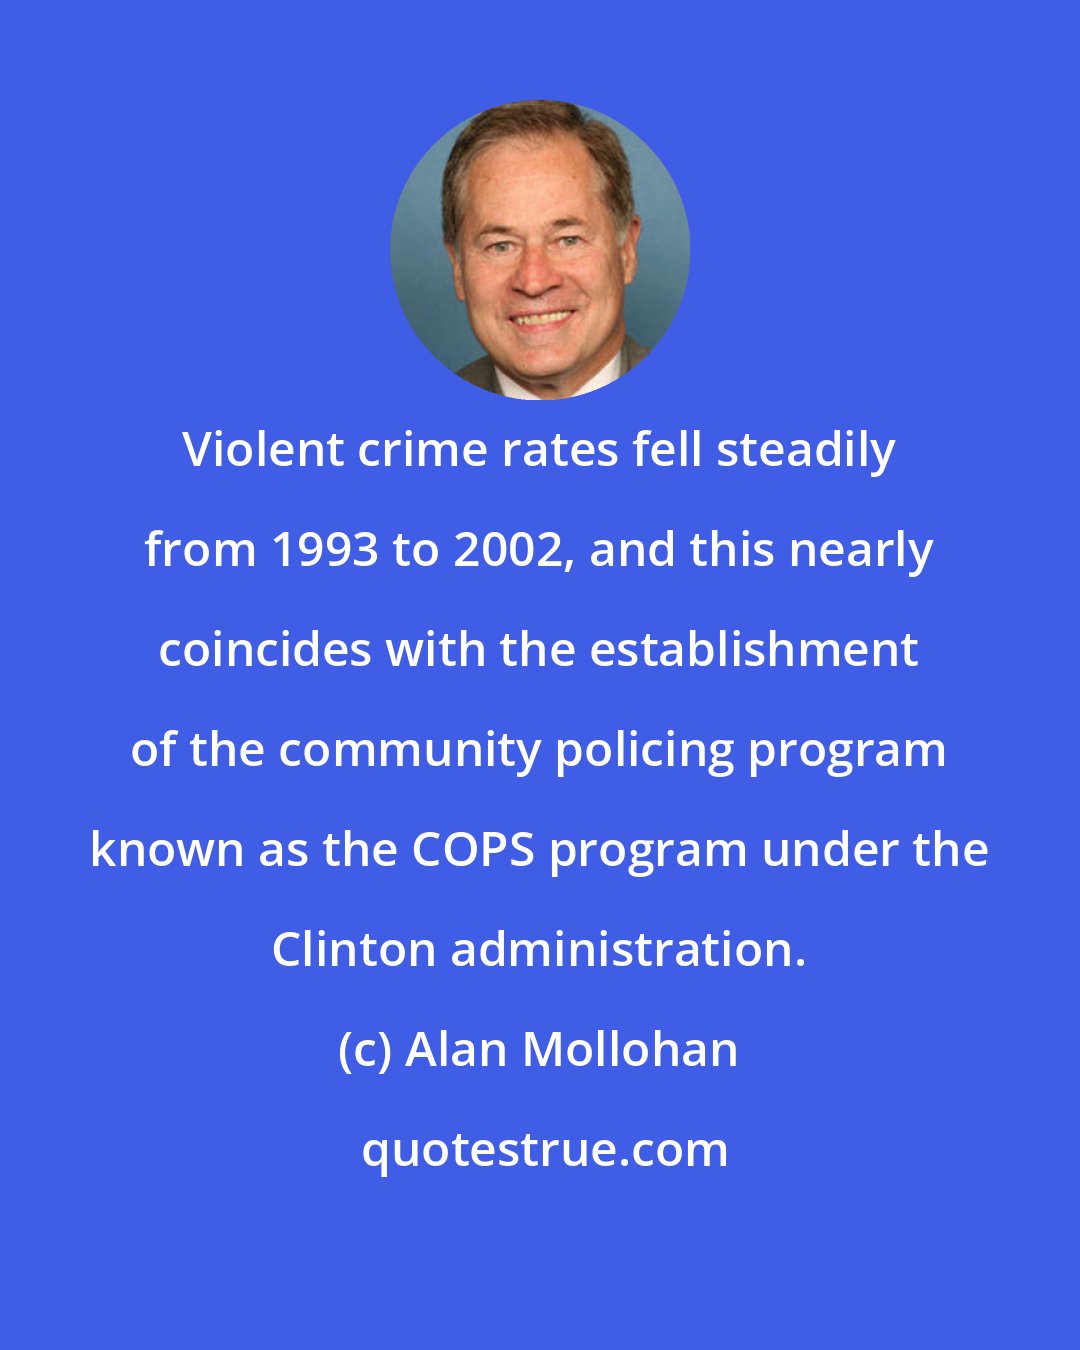 Alan Mollohan: Violent crime rates fell steadily from 1993 to 2002, and this nearly coincides with the establishment of the community policing program known as the COPS program under the Clinton administration.